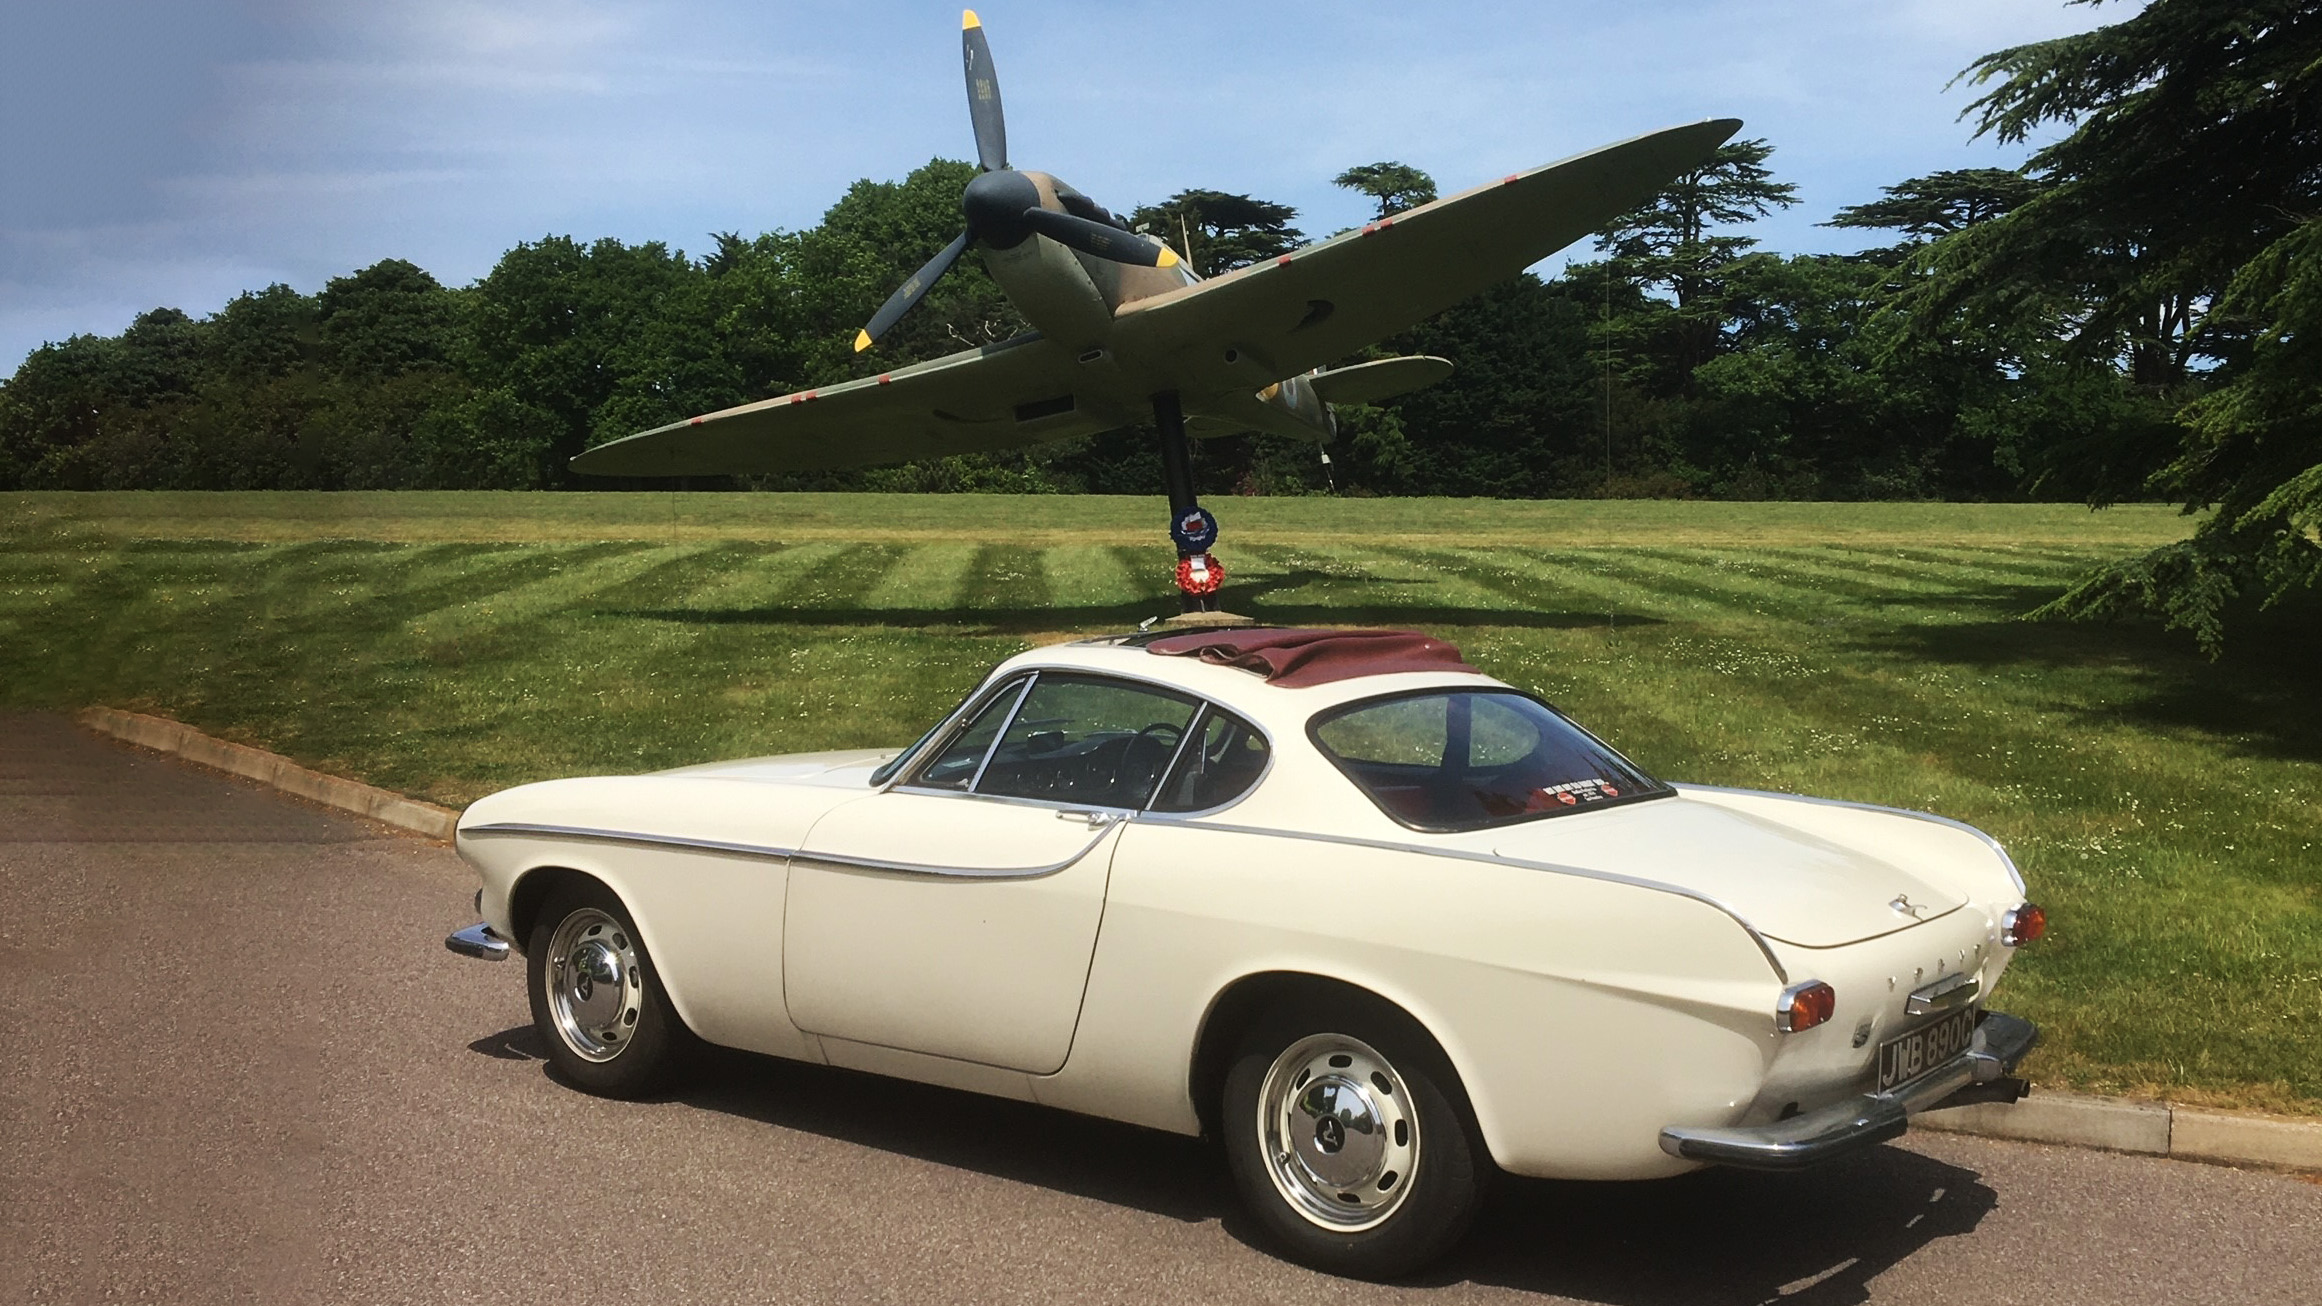 Classic Volvo P1800S in Ivory with Burgundy Webasto Roof in front of a Military Wold War plane on display in a park